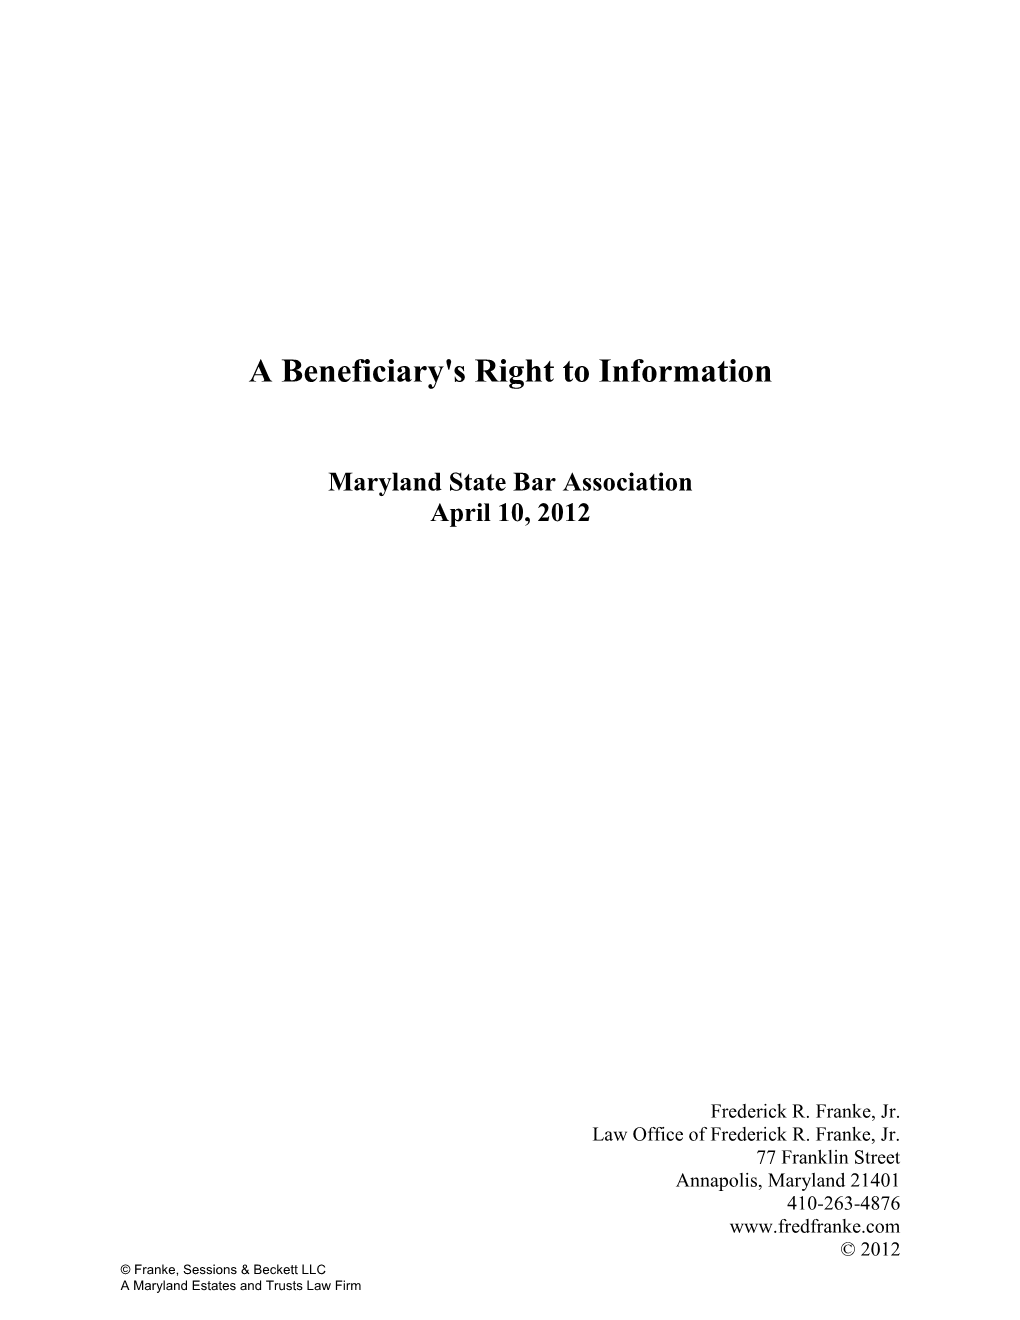 A Beneficiary's Right to Information